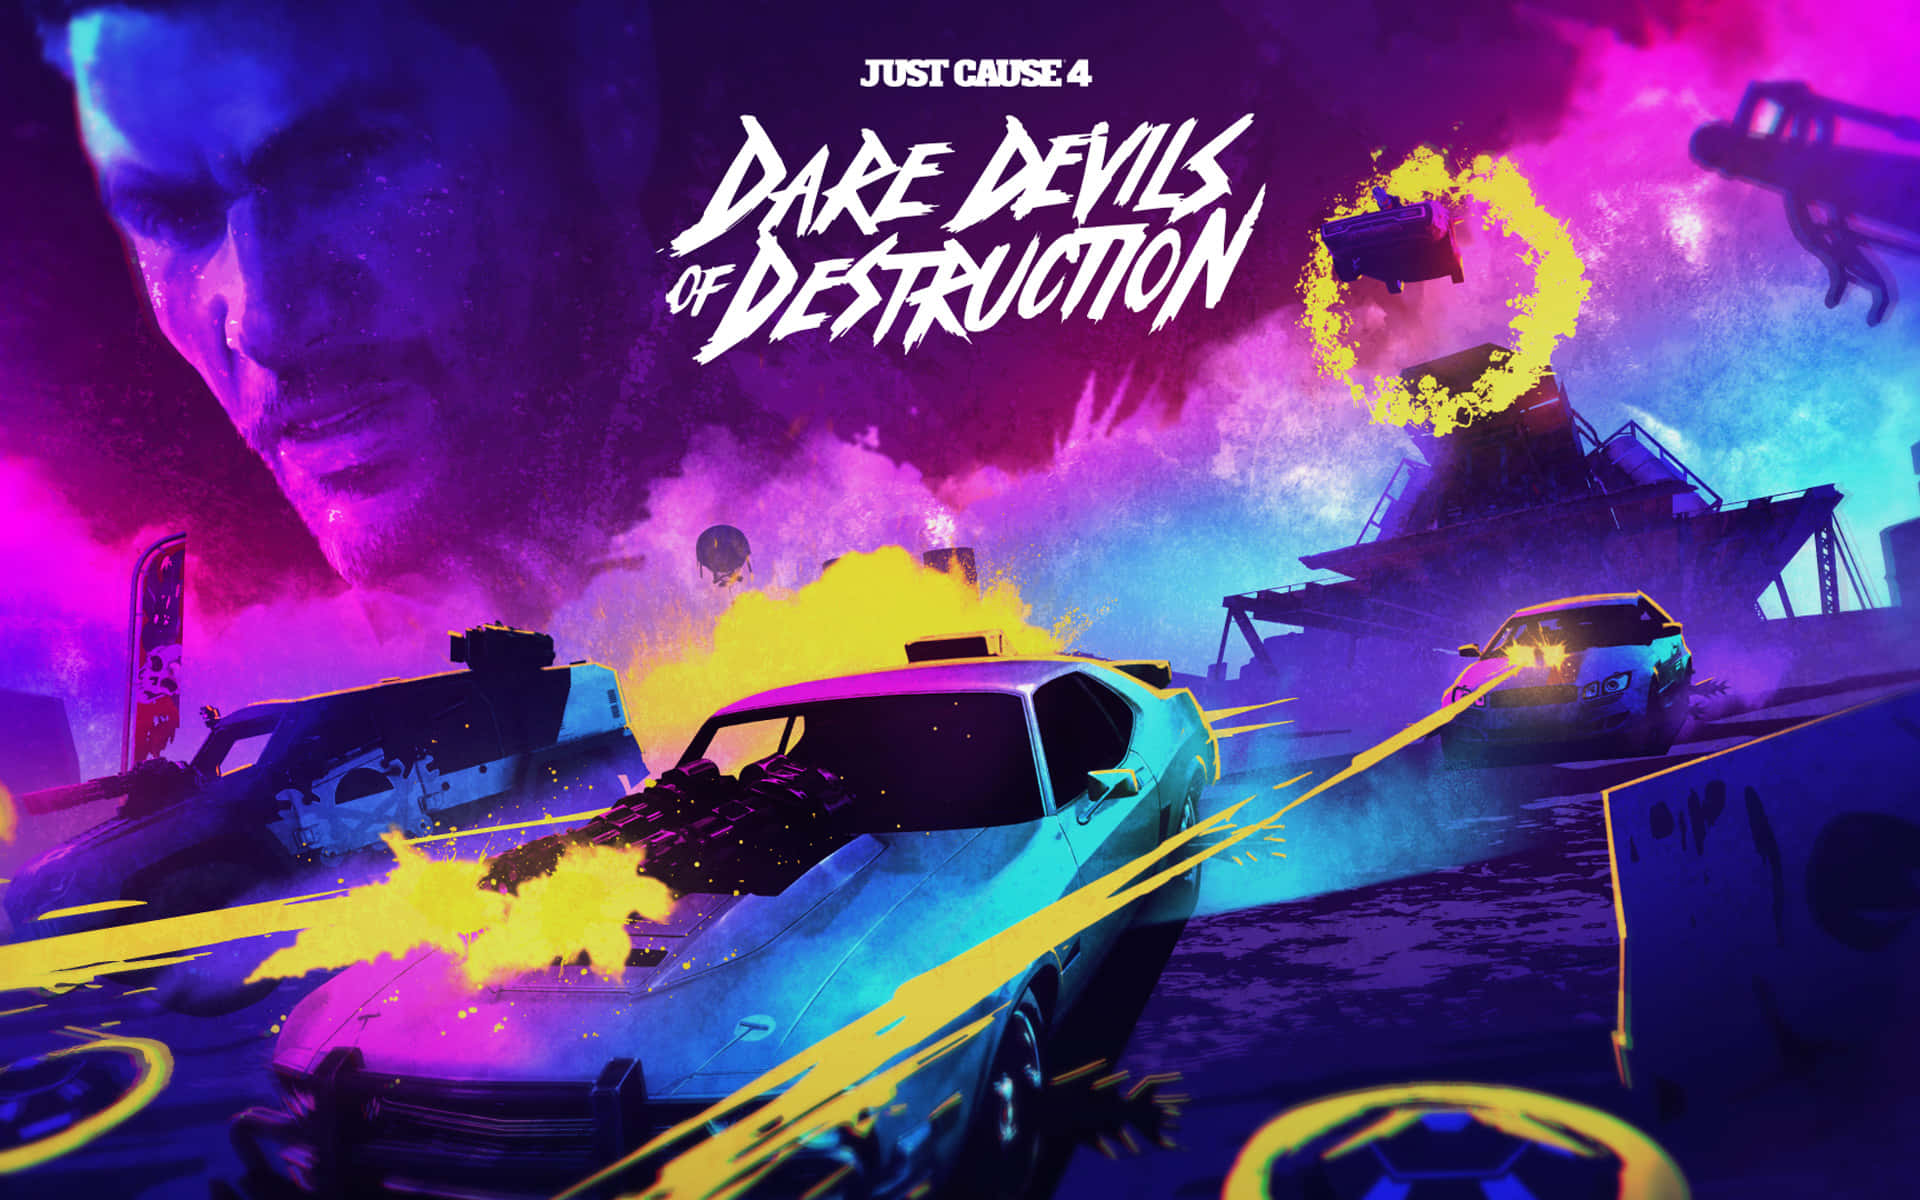 The Cover Of The Game, Dune Devils Of Destruction